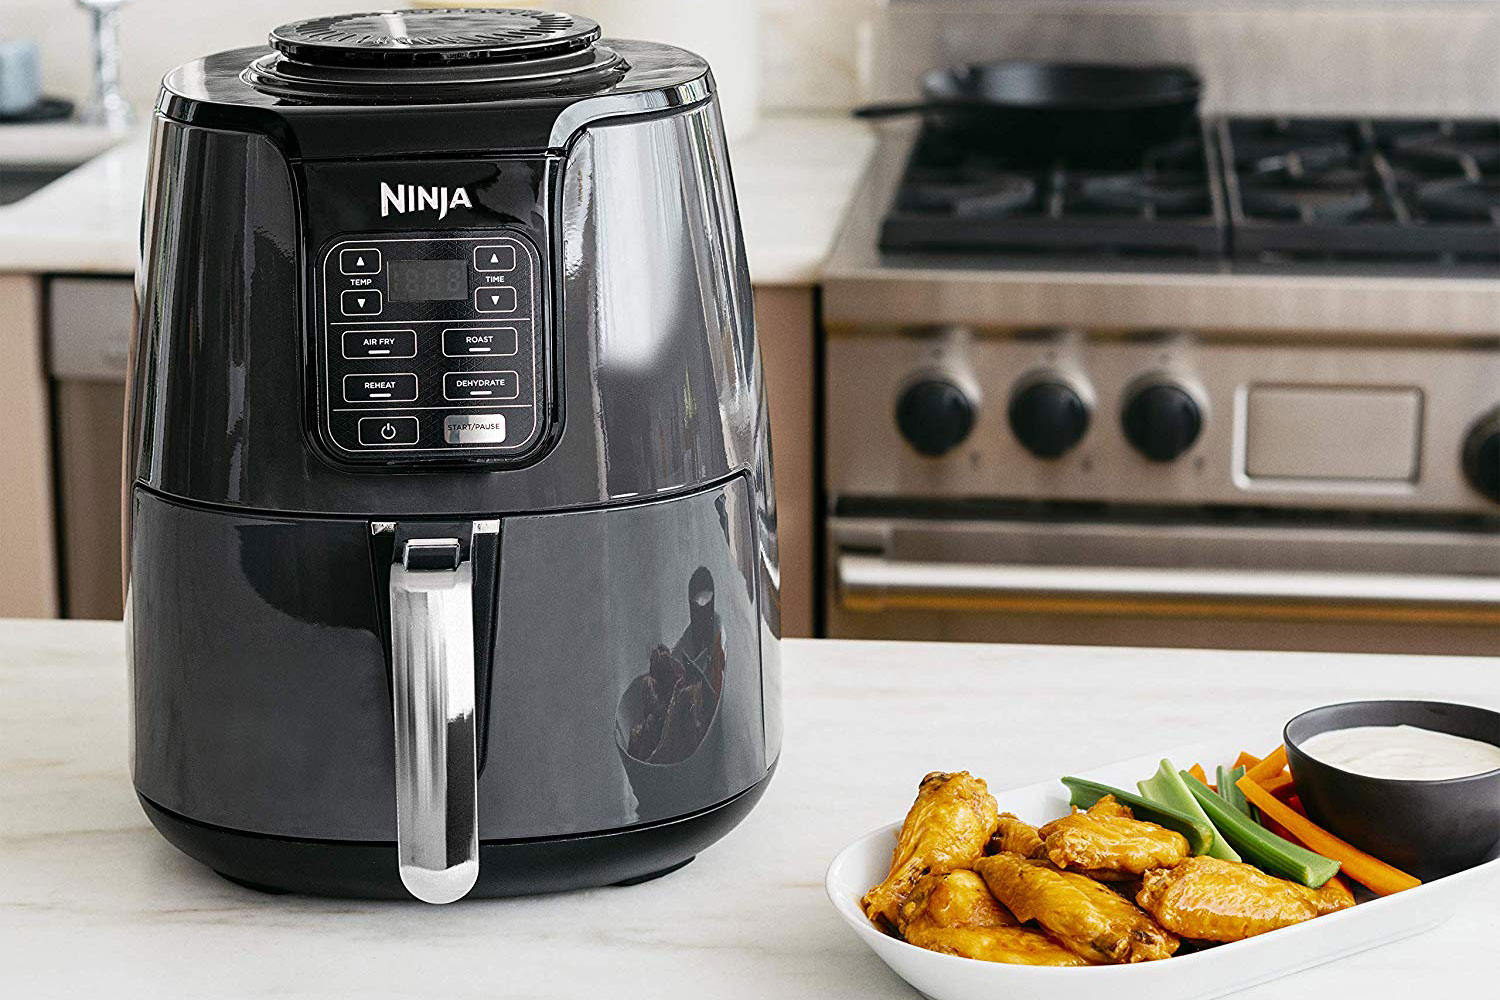 This top-rated air fryer is on sale for just $25 at Best Buy